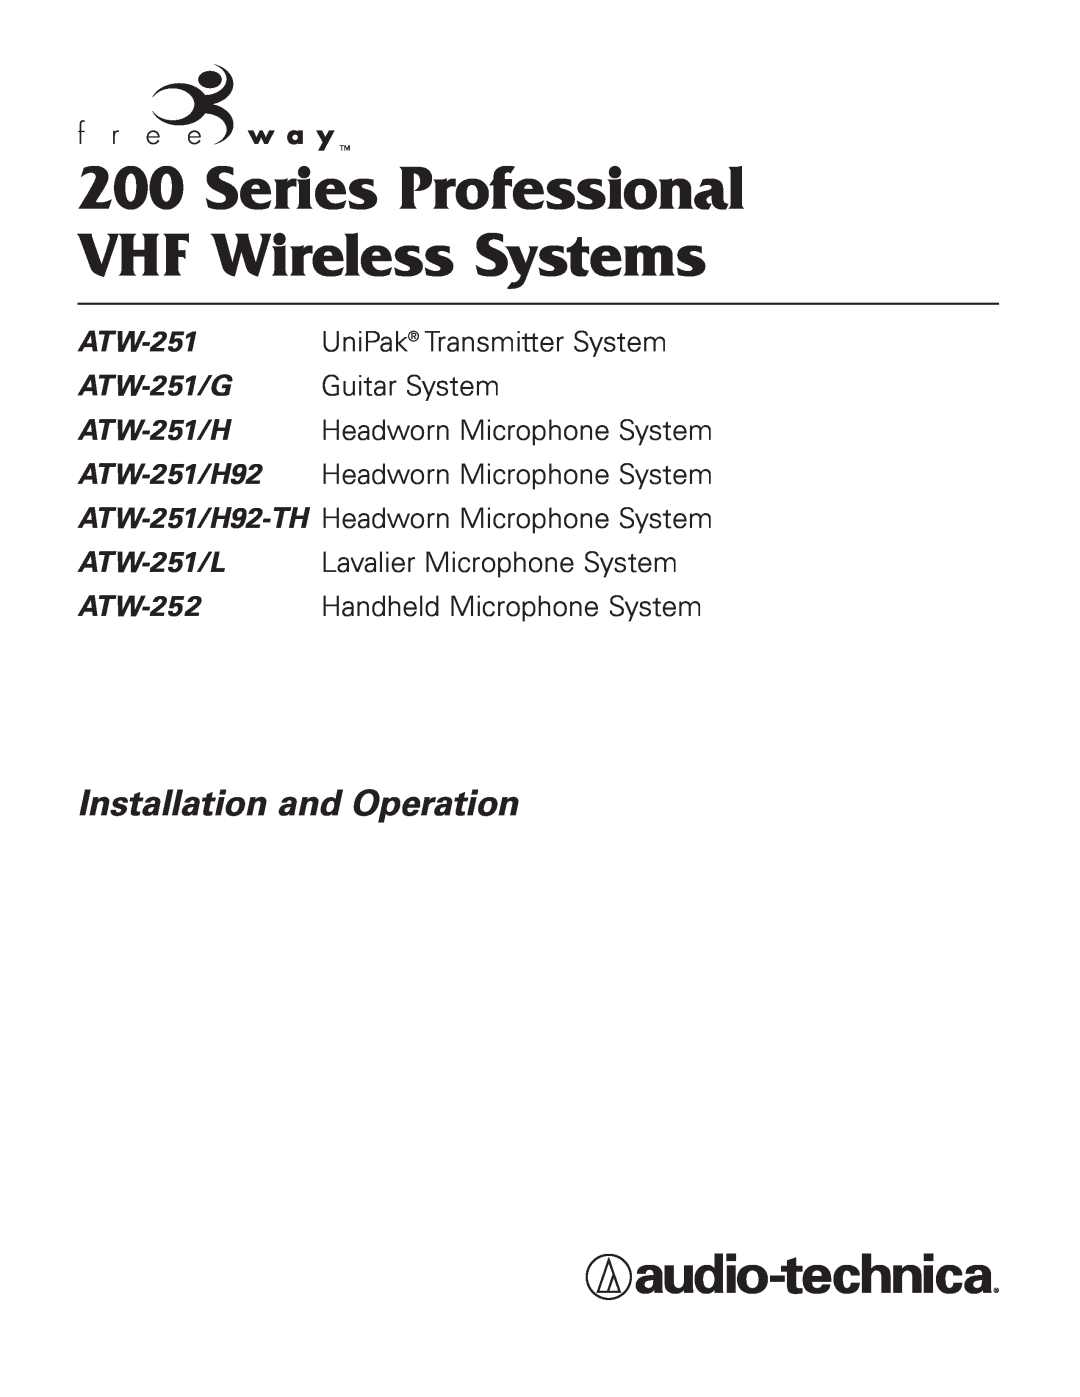 Audio-Technica H92 manual Installation and Operation, Series Professional VHF Wireless Systems, ATW-251/G, ATW-251/H 